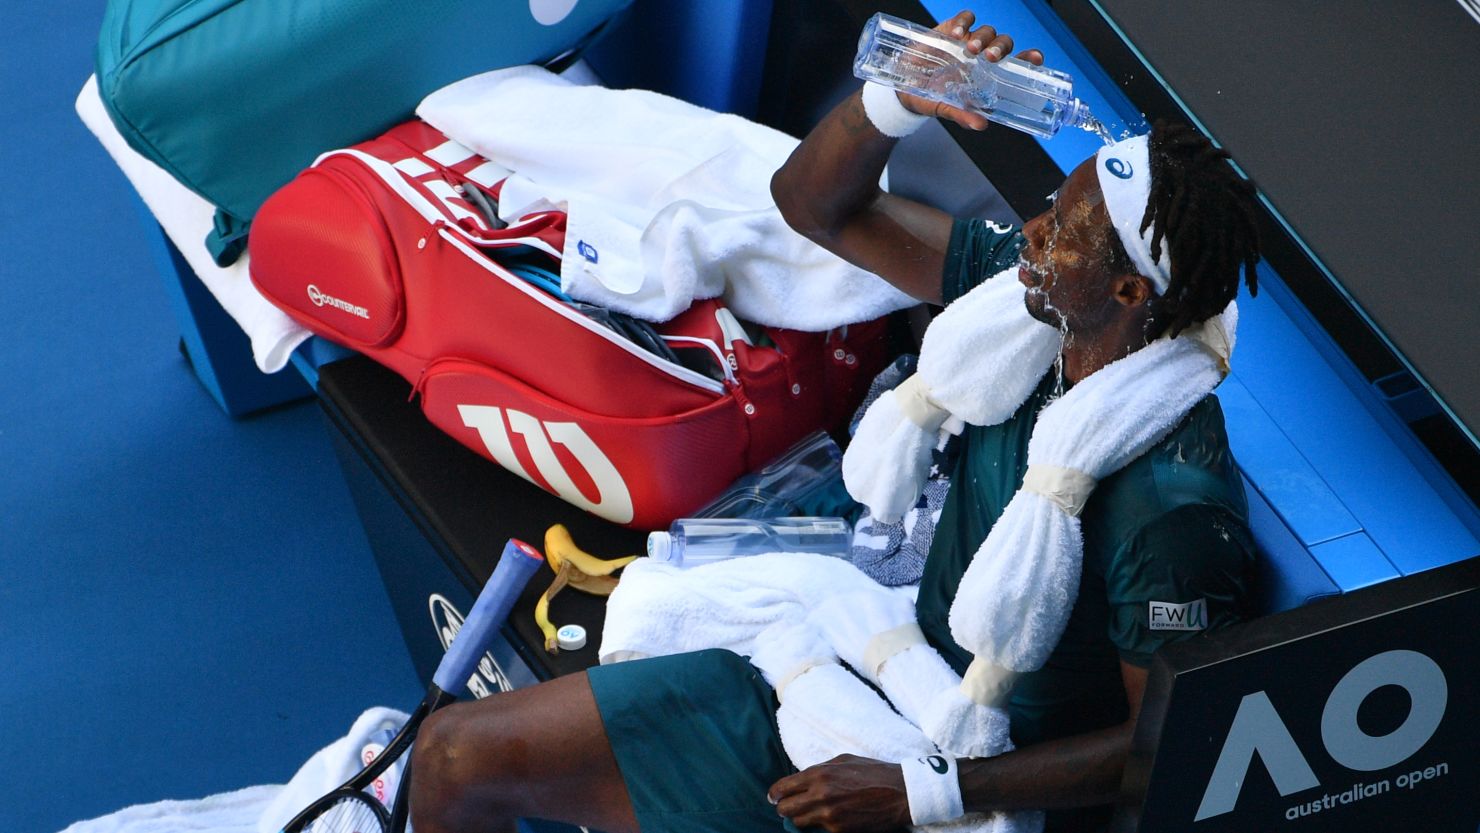 France's Gael Monfils pours water on himself to cool down from the heat during their men's singles second round match against Serbia's Novak Djokovic on day four of the Australian Open tennis tournament in Melbourne on January 18, 2018. / AFP PHOTO / SAEED KHAN / -- IMAGE RESTRICTED TO EDITORIAL USE - STRICTLY NO COMMERCIAL USE --        (Photo credit should read SAEED KHAN/AFP/Getty Images)